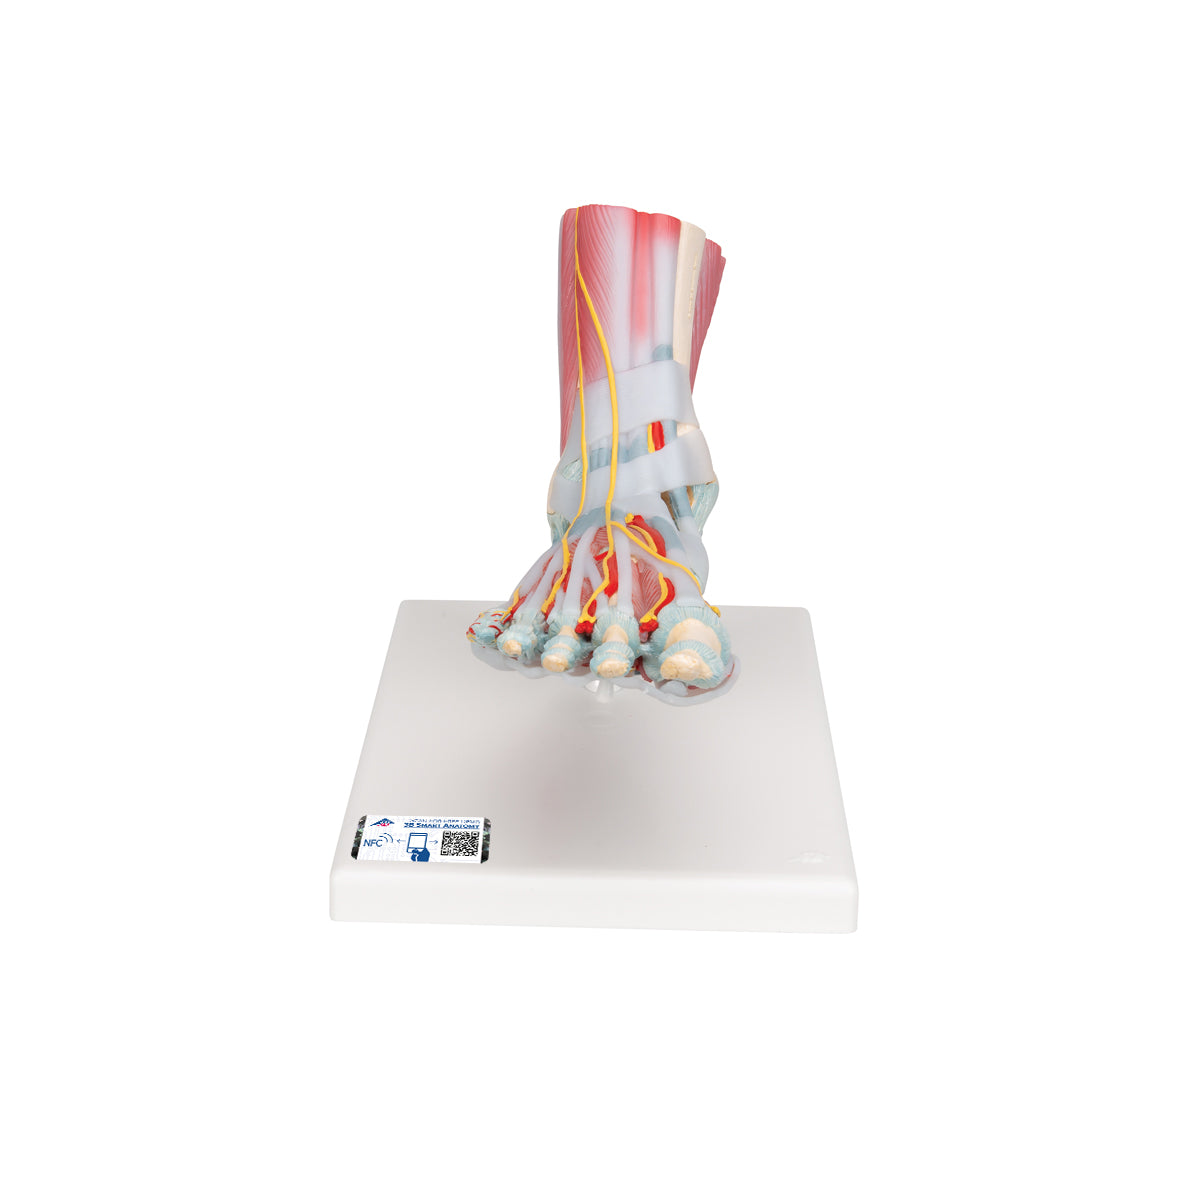 Foot Skeleton Model with Ligaments & Muscles